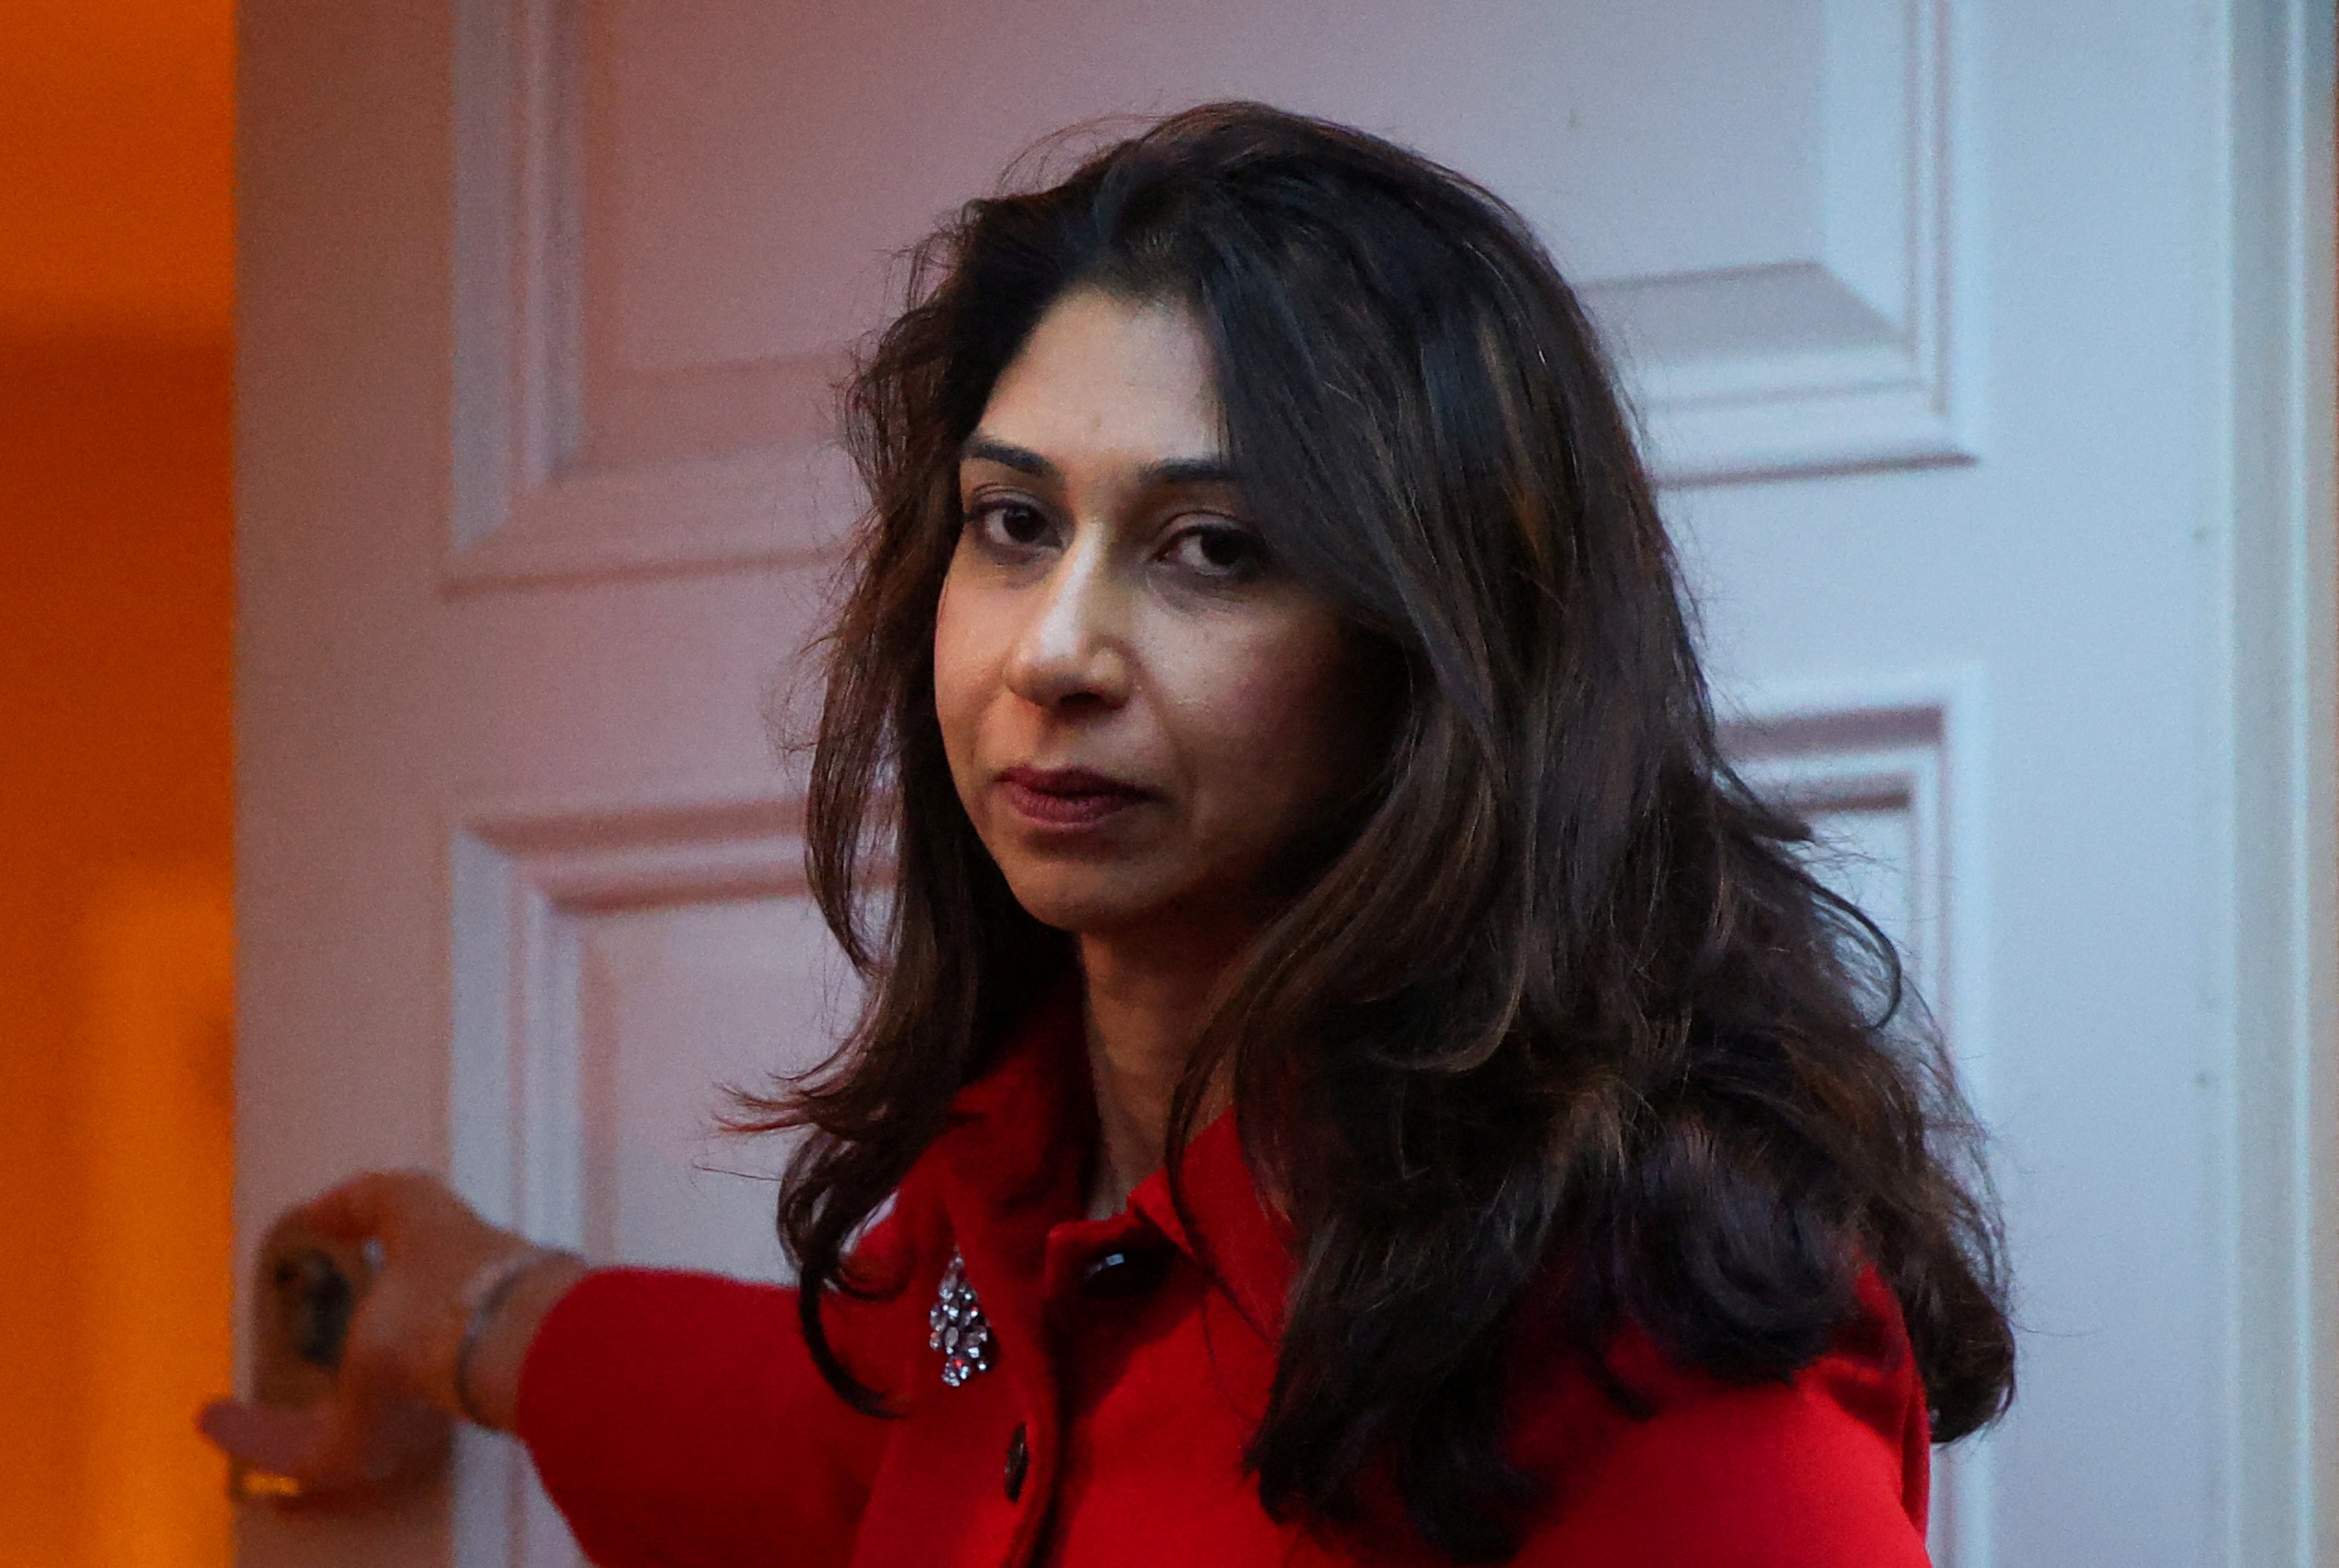 Suella Braverman has been sacked from Cabinet